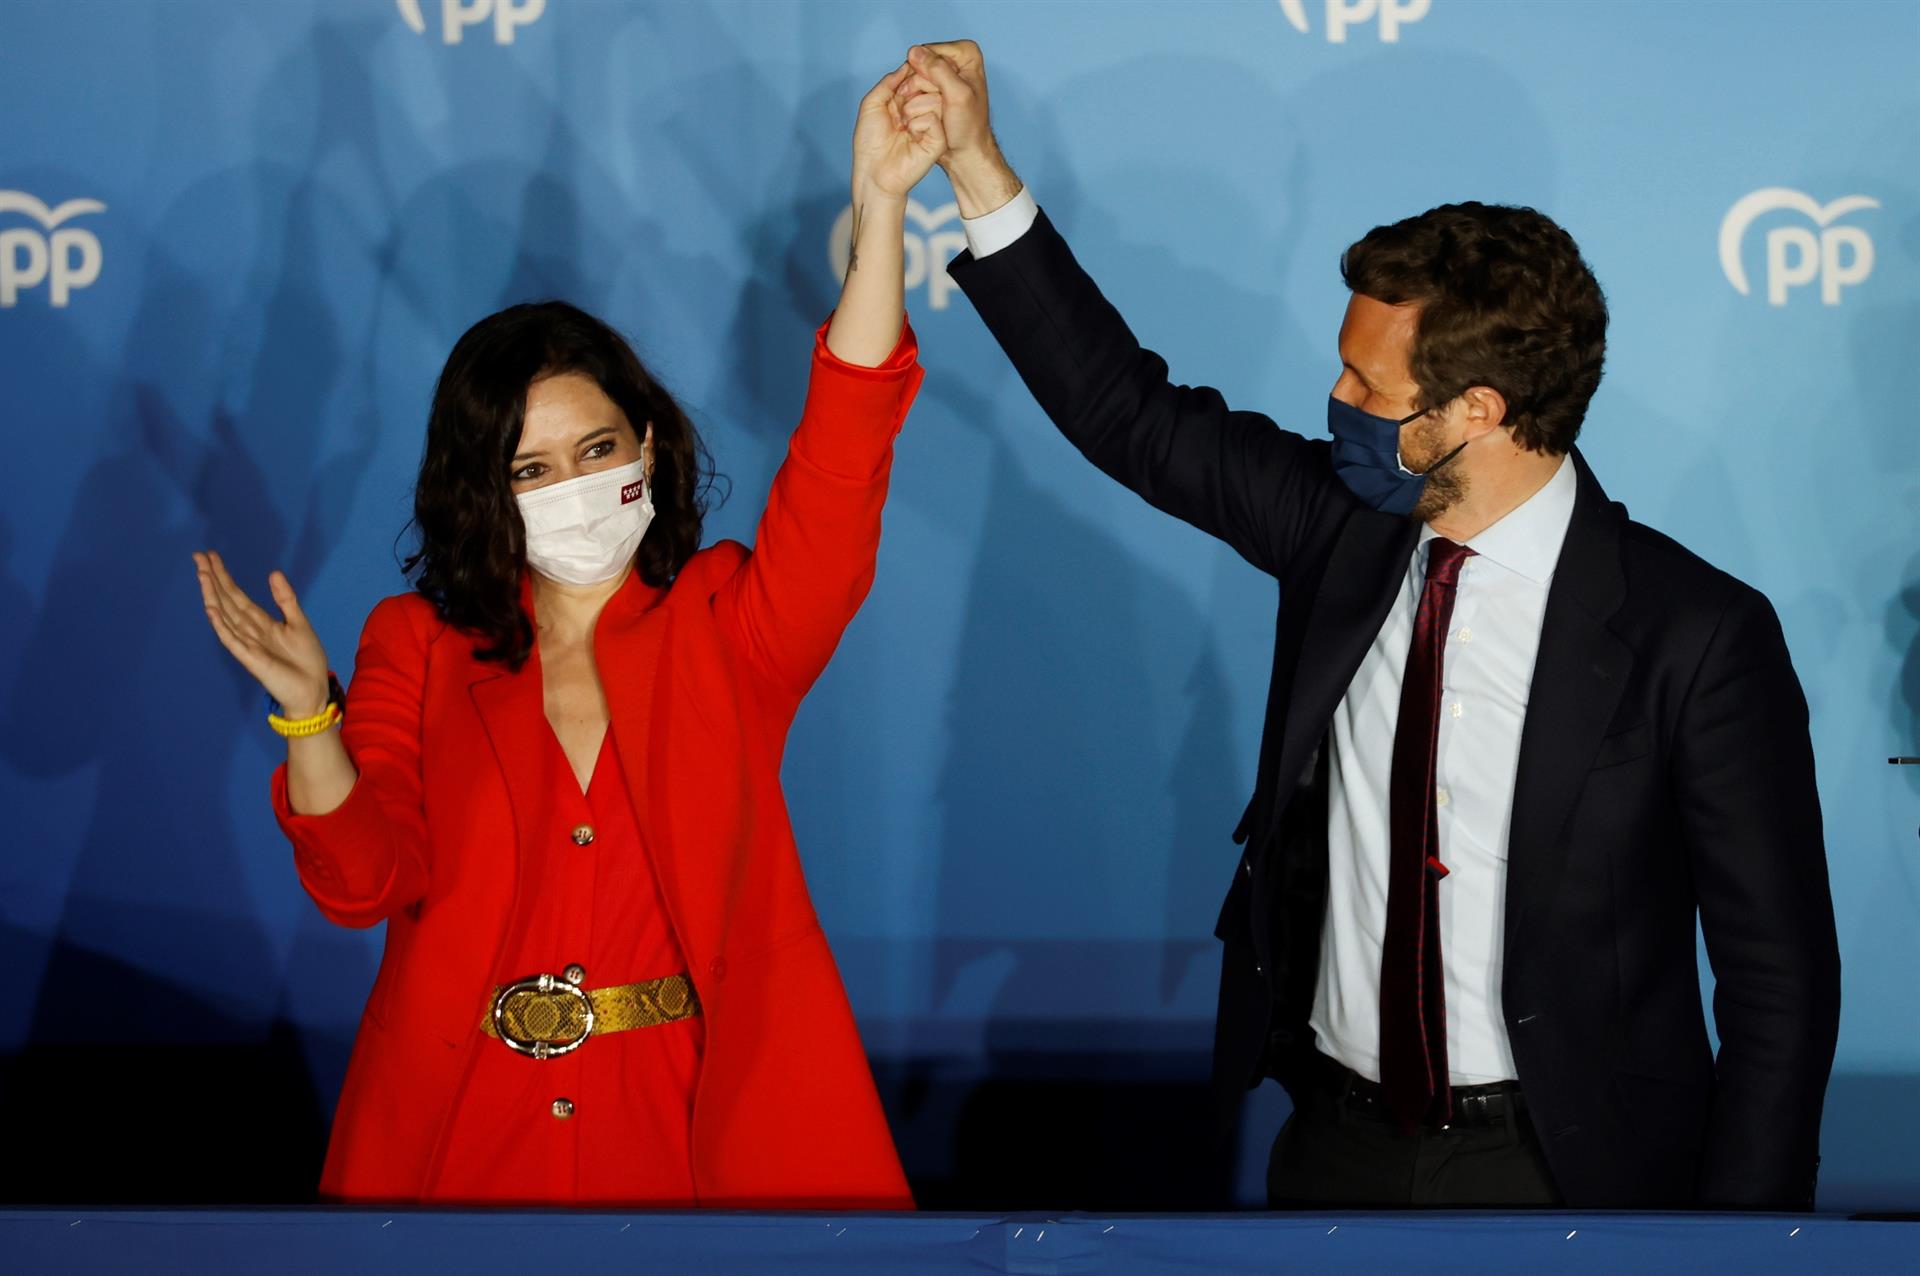 PP populist Ayuso sweeps to victory in Madrid regional election as Socialists crash